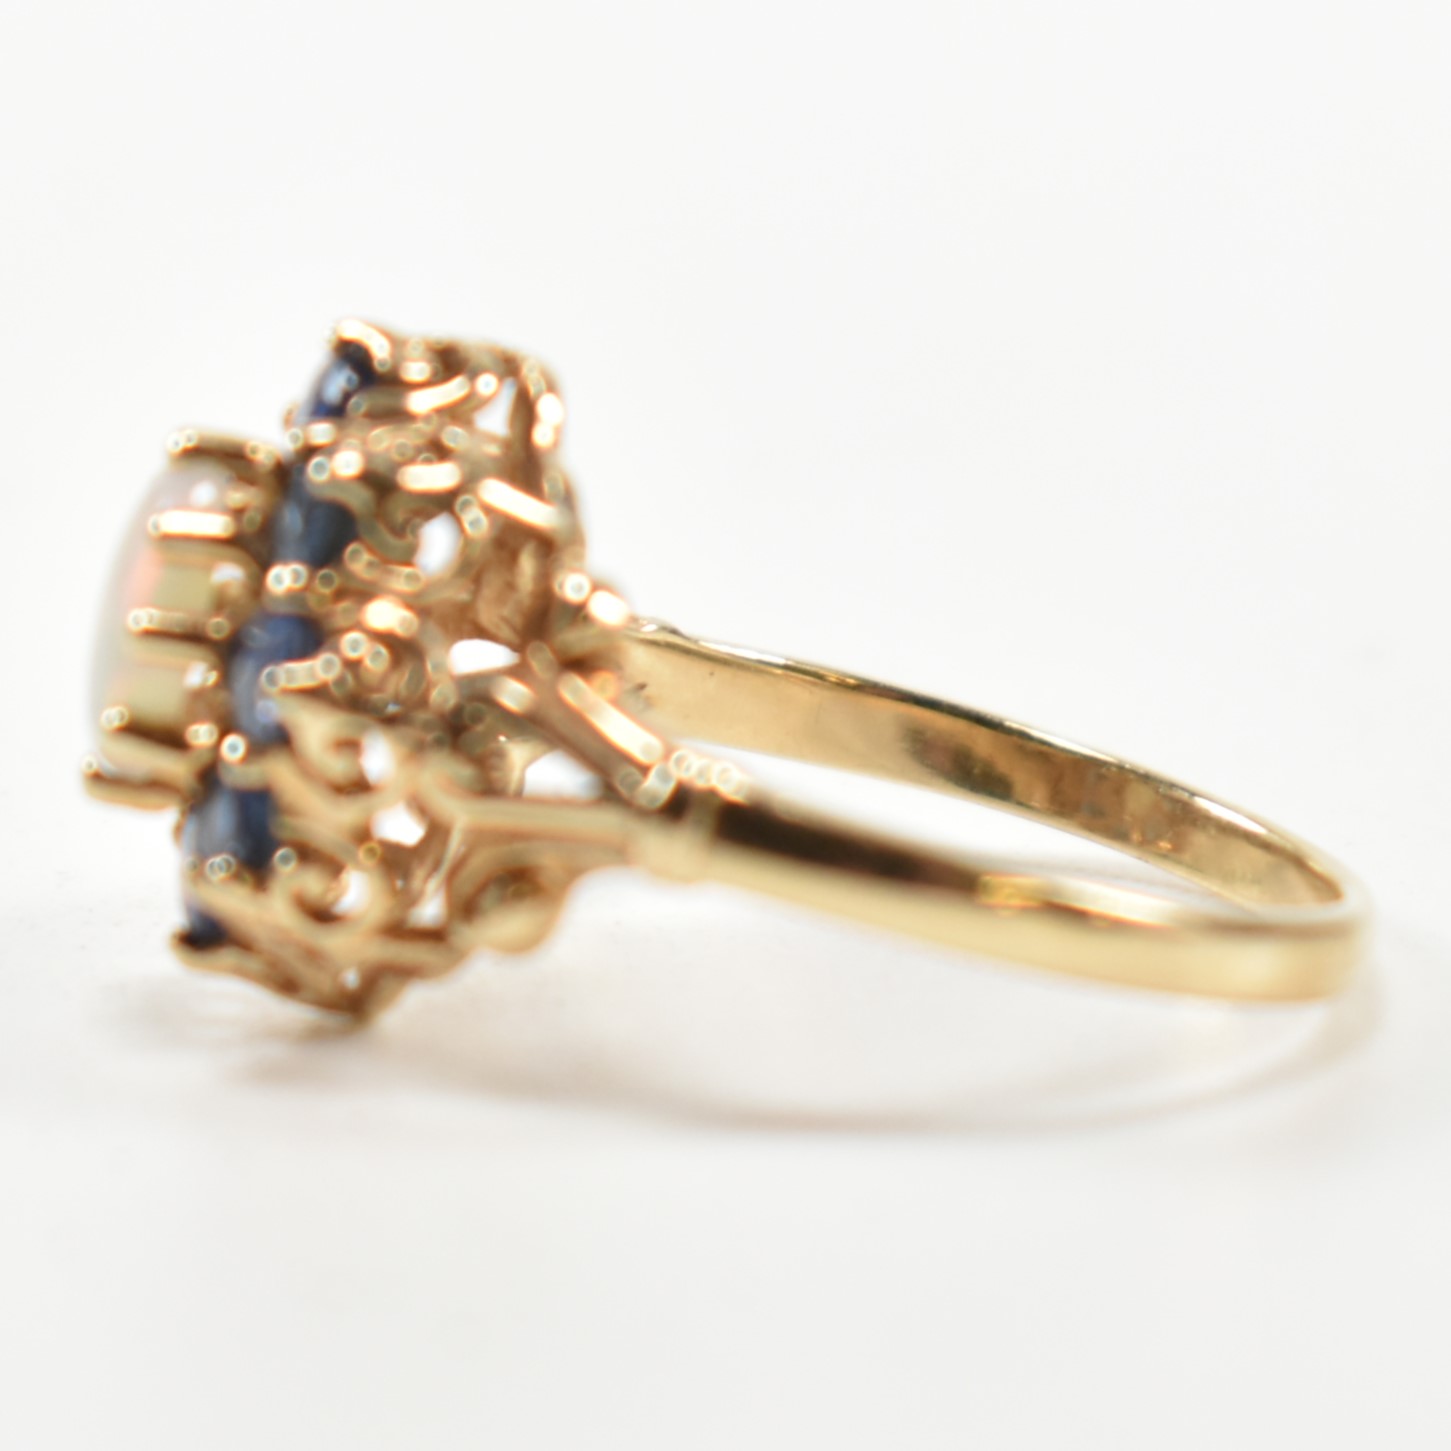 HALLMARKED 9CT GOLD SAPPHIRE & OPAL CLUSTER RING - Image 9 of 11